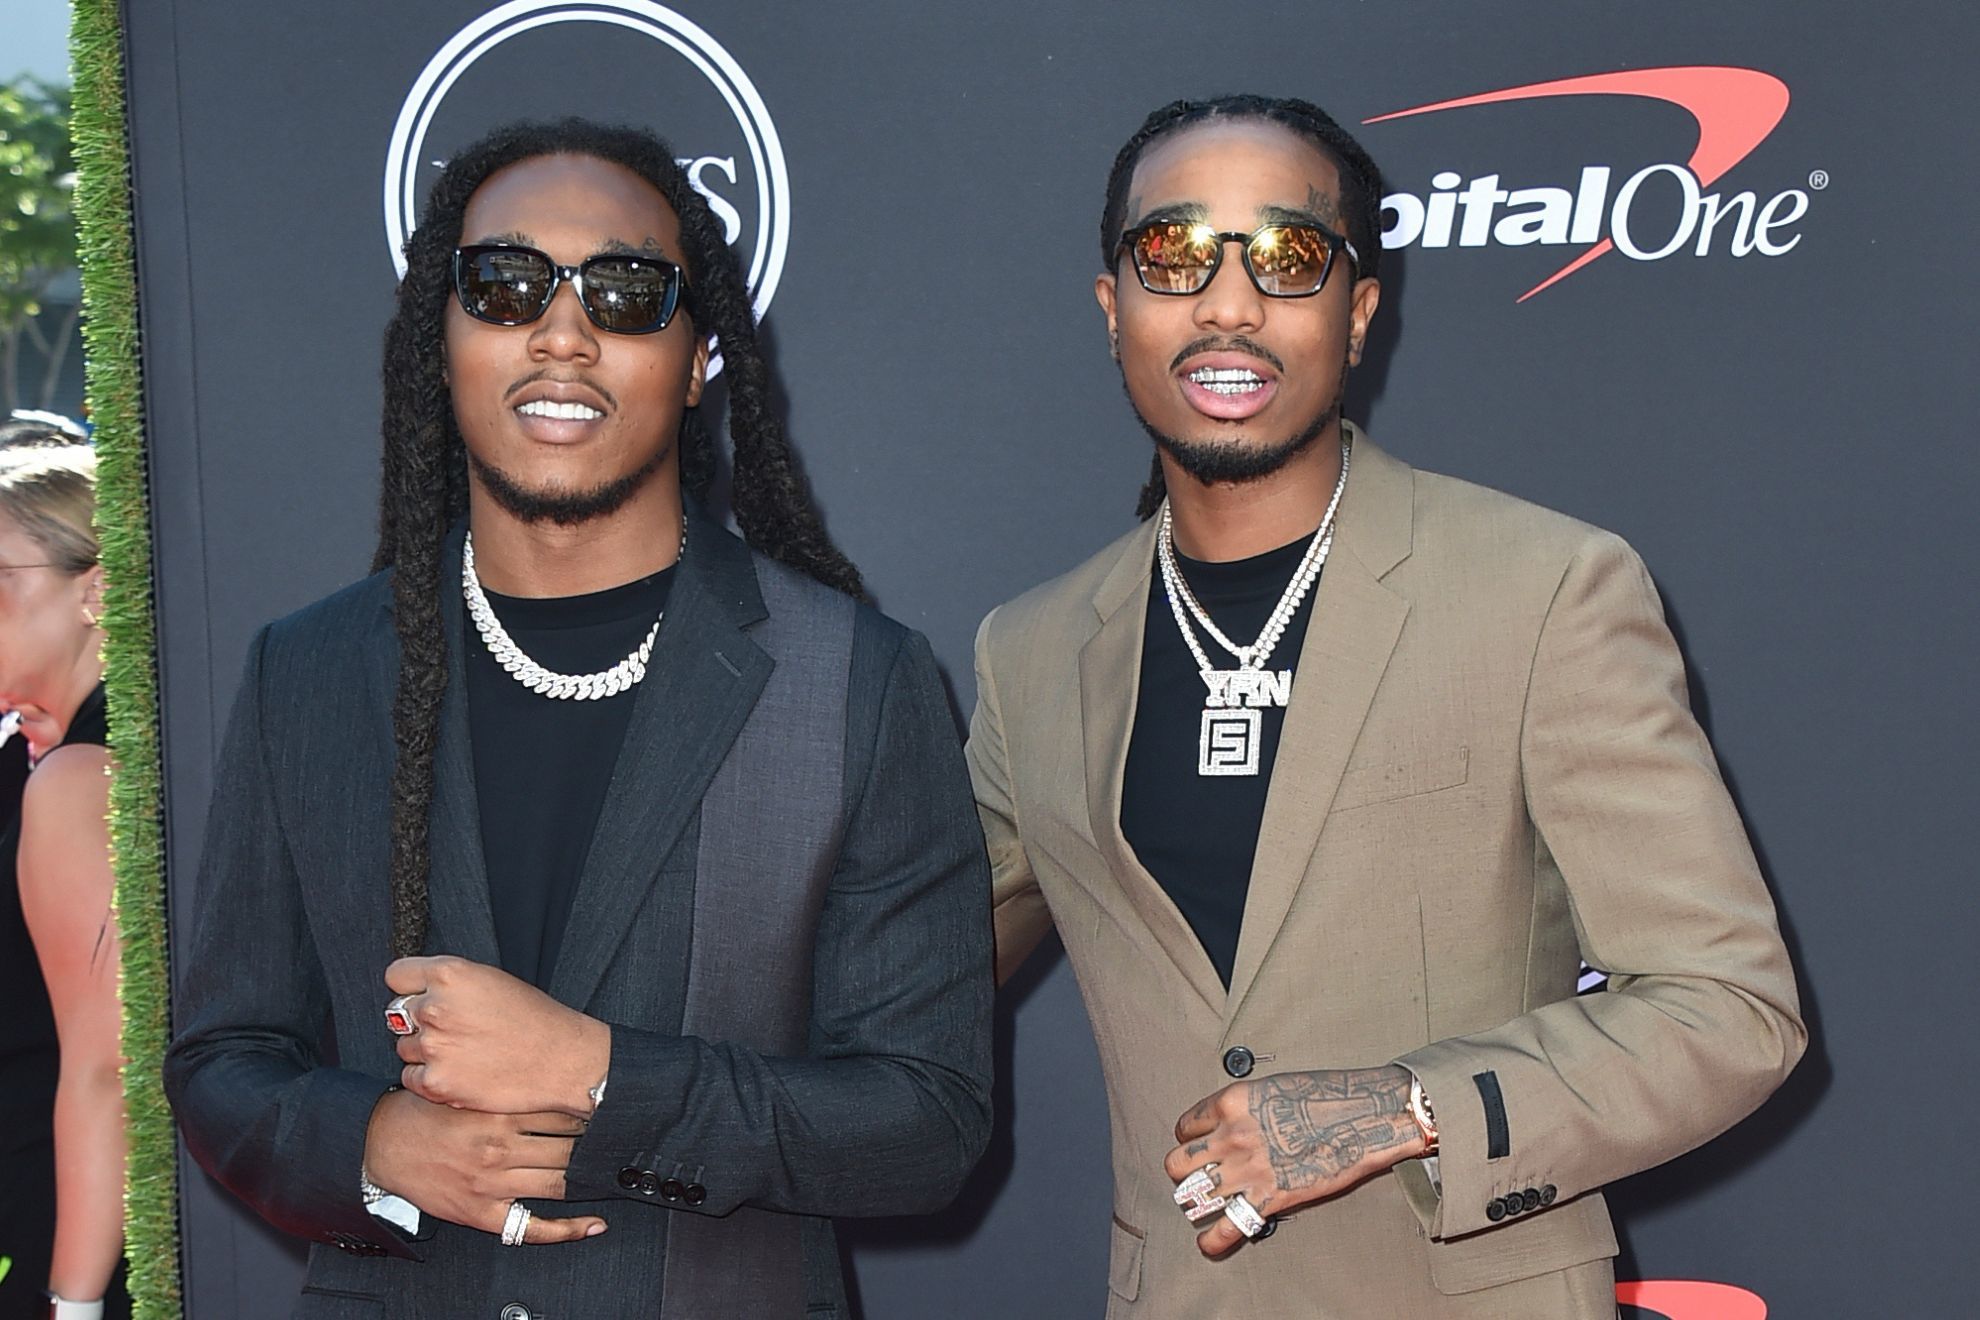 Takeoff (left) and Quavo (right) of Migos